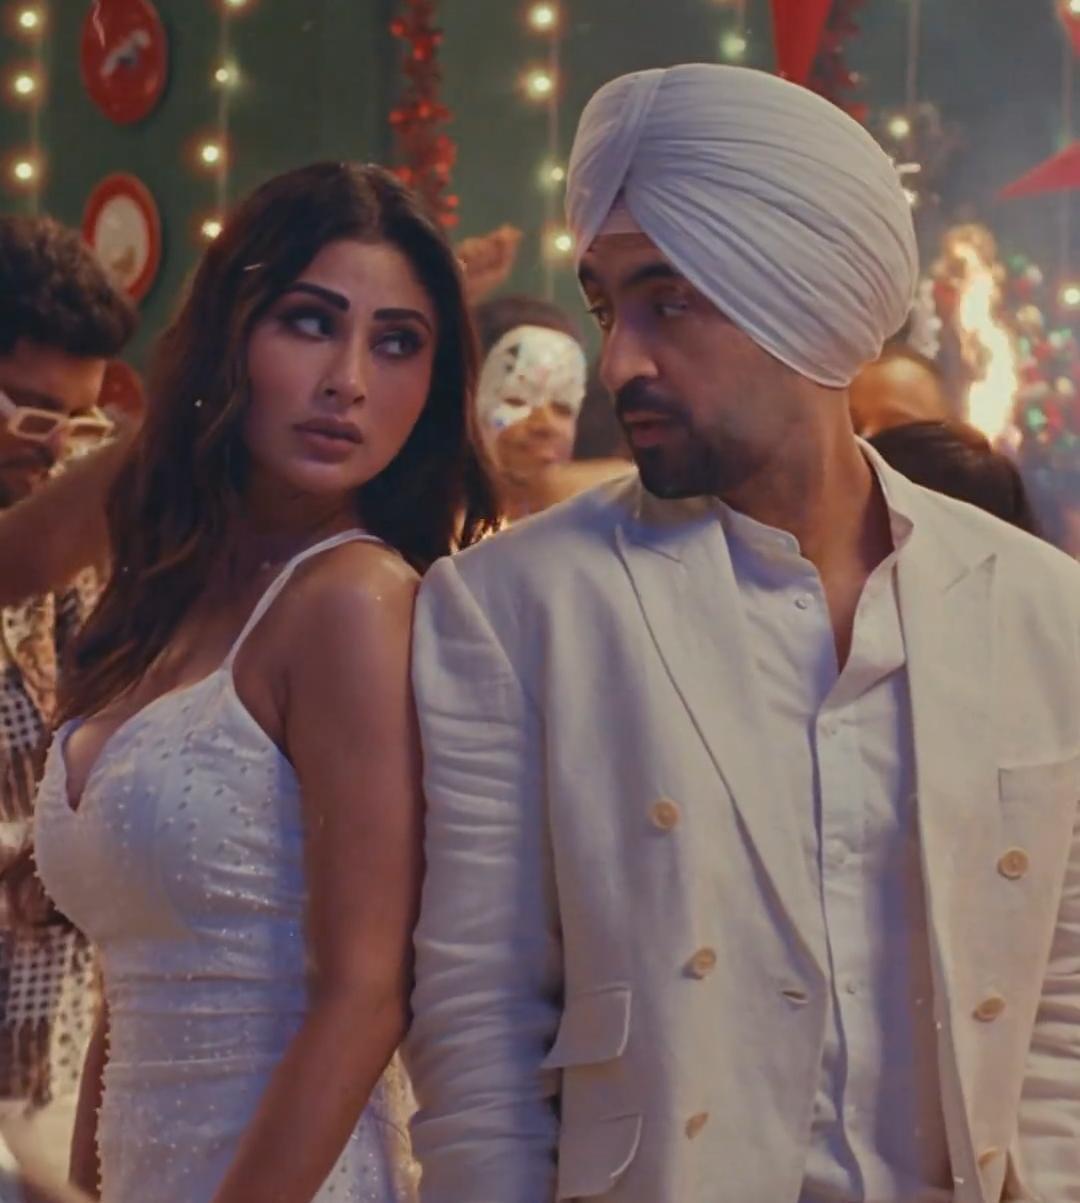 On his birthday, Diljit Dosanjh’s song ‘Love Ya’ featuring Mouni Roy has international vibe fused with desi punch